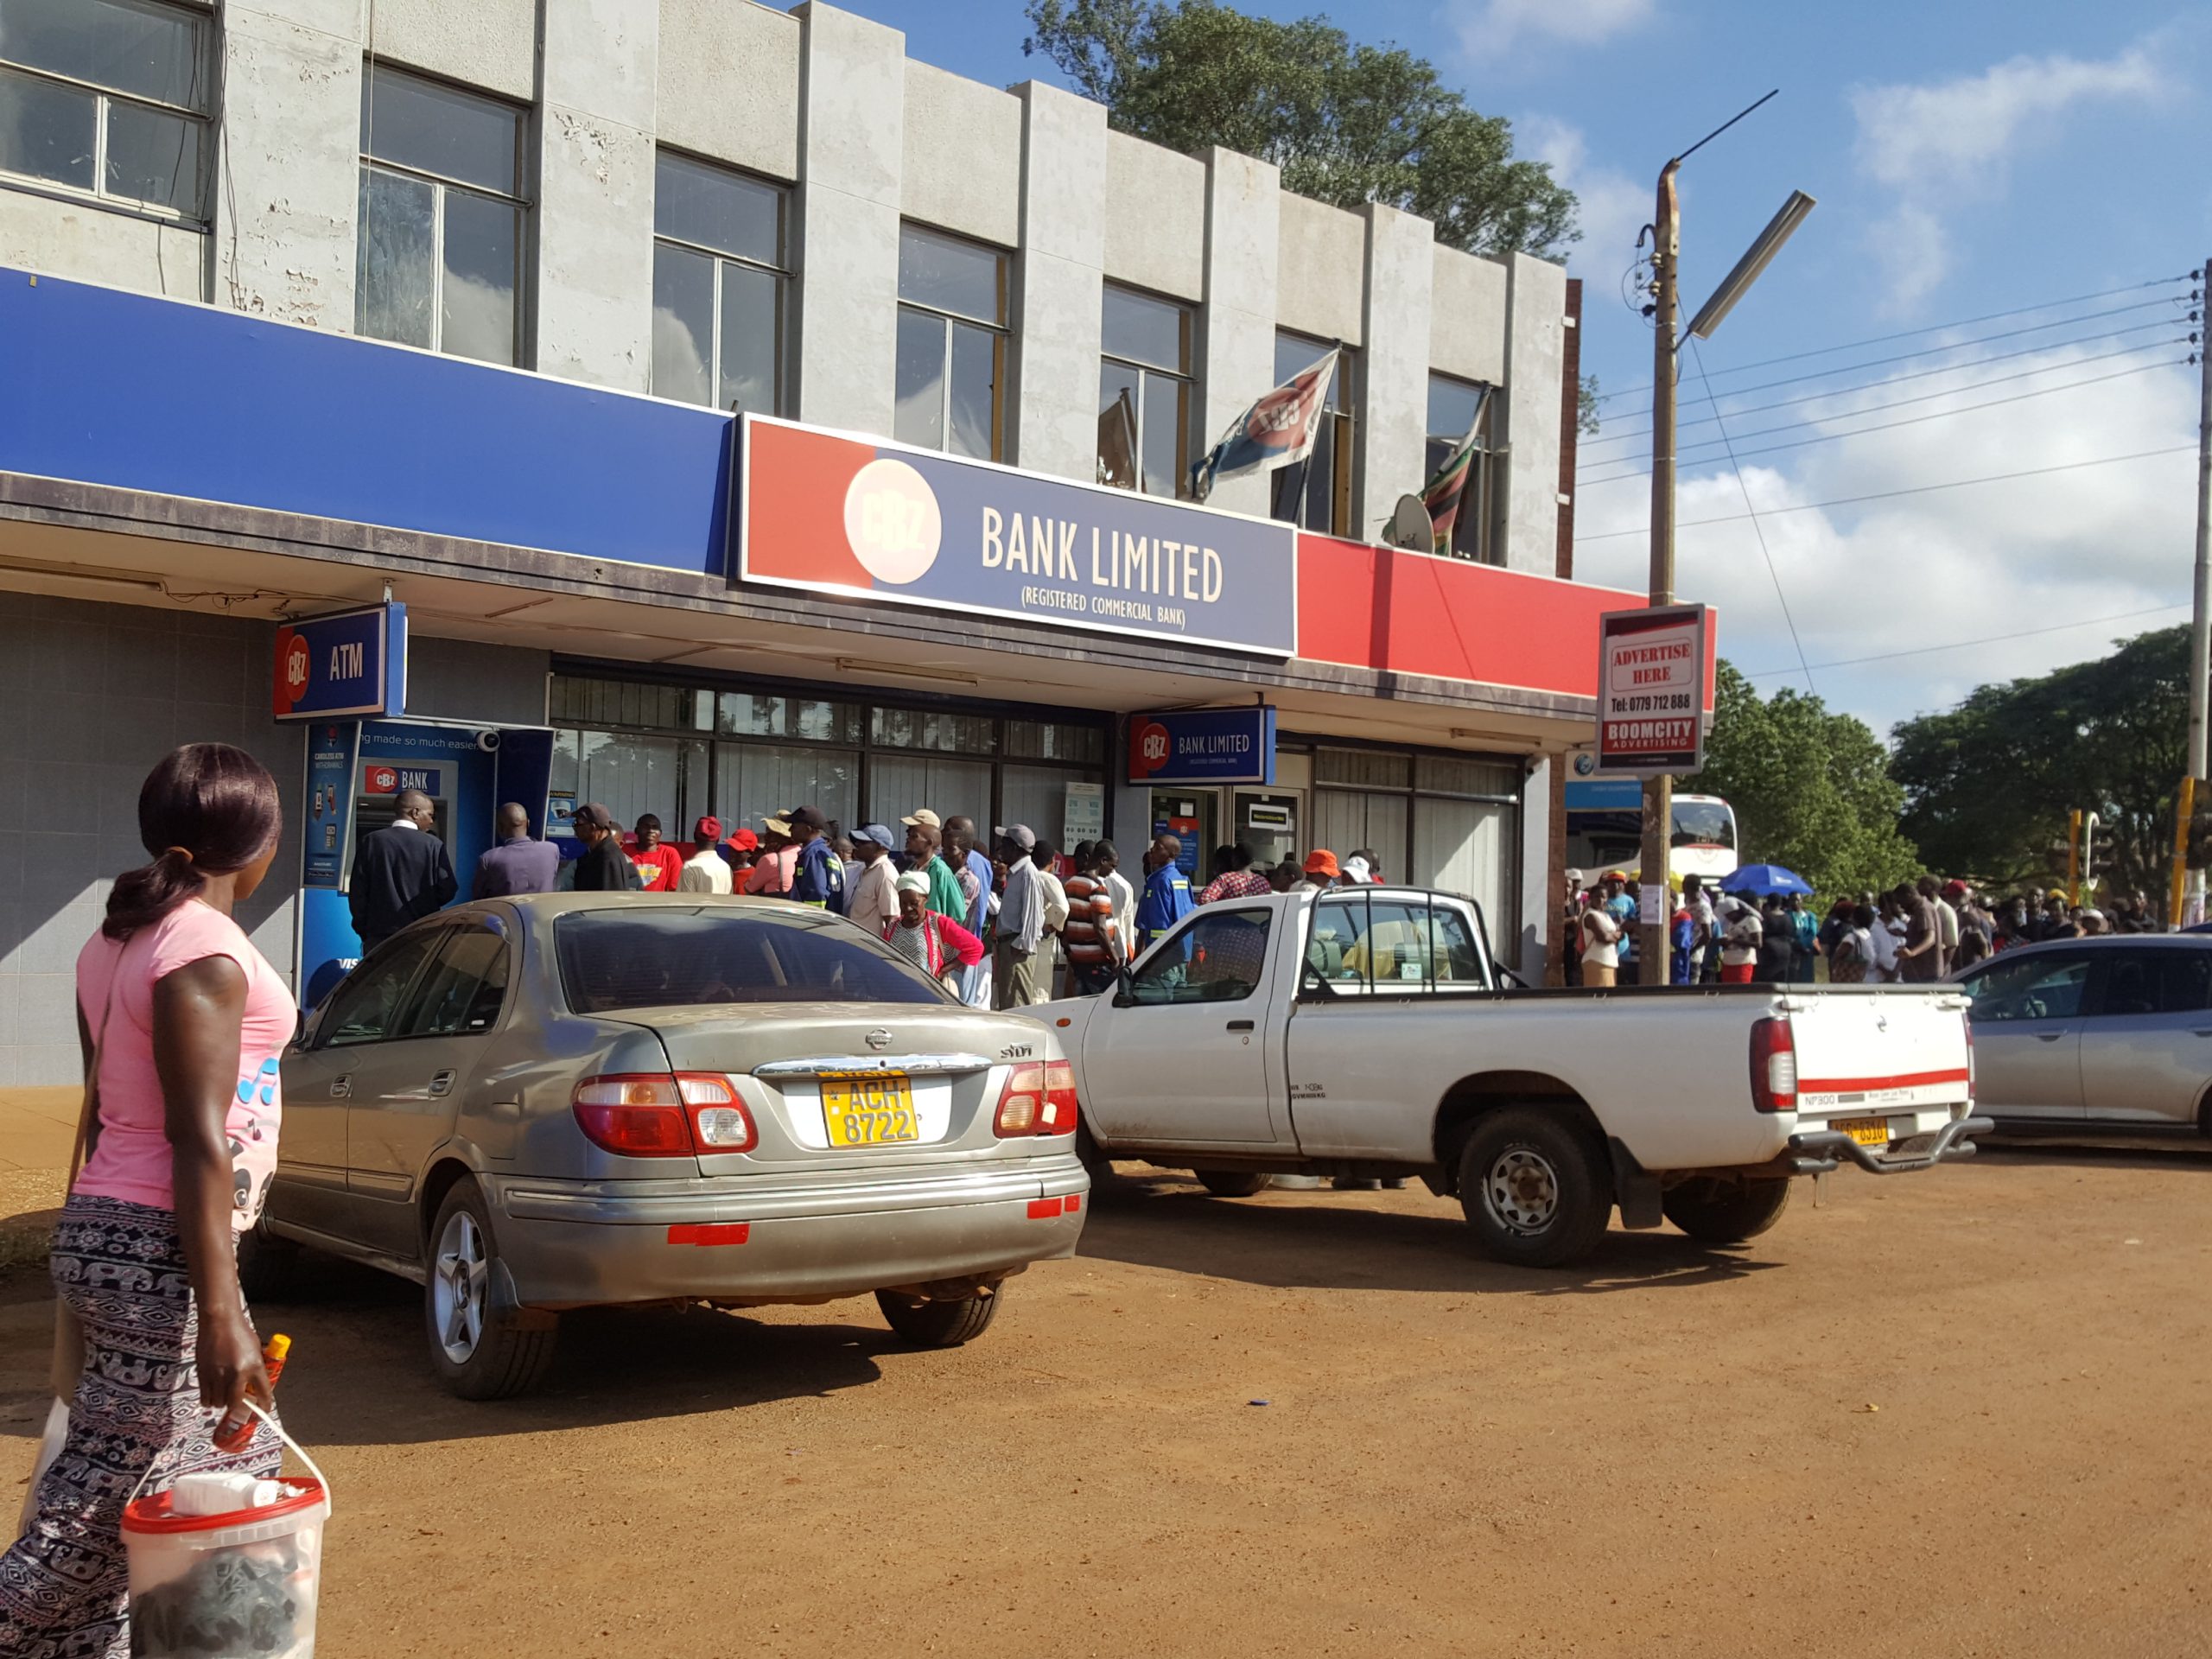 Queueing in front of bank in Zimbabwe